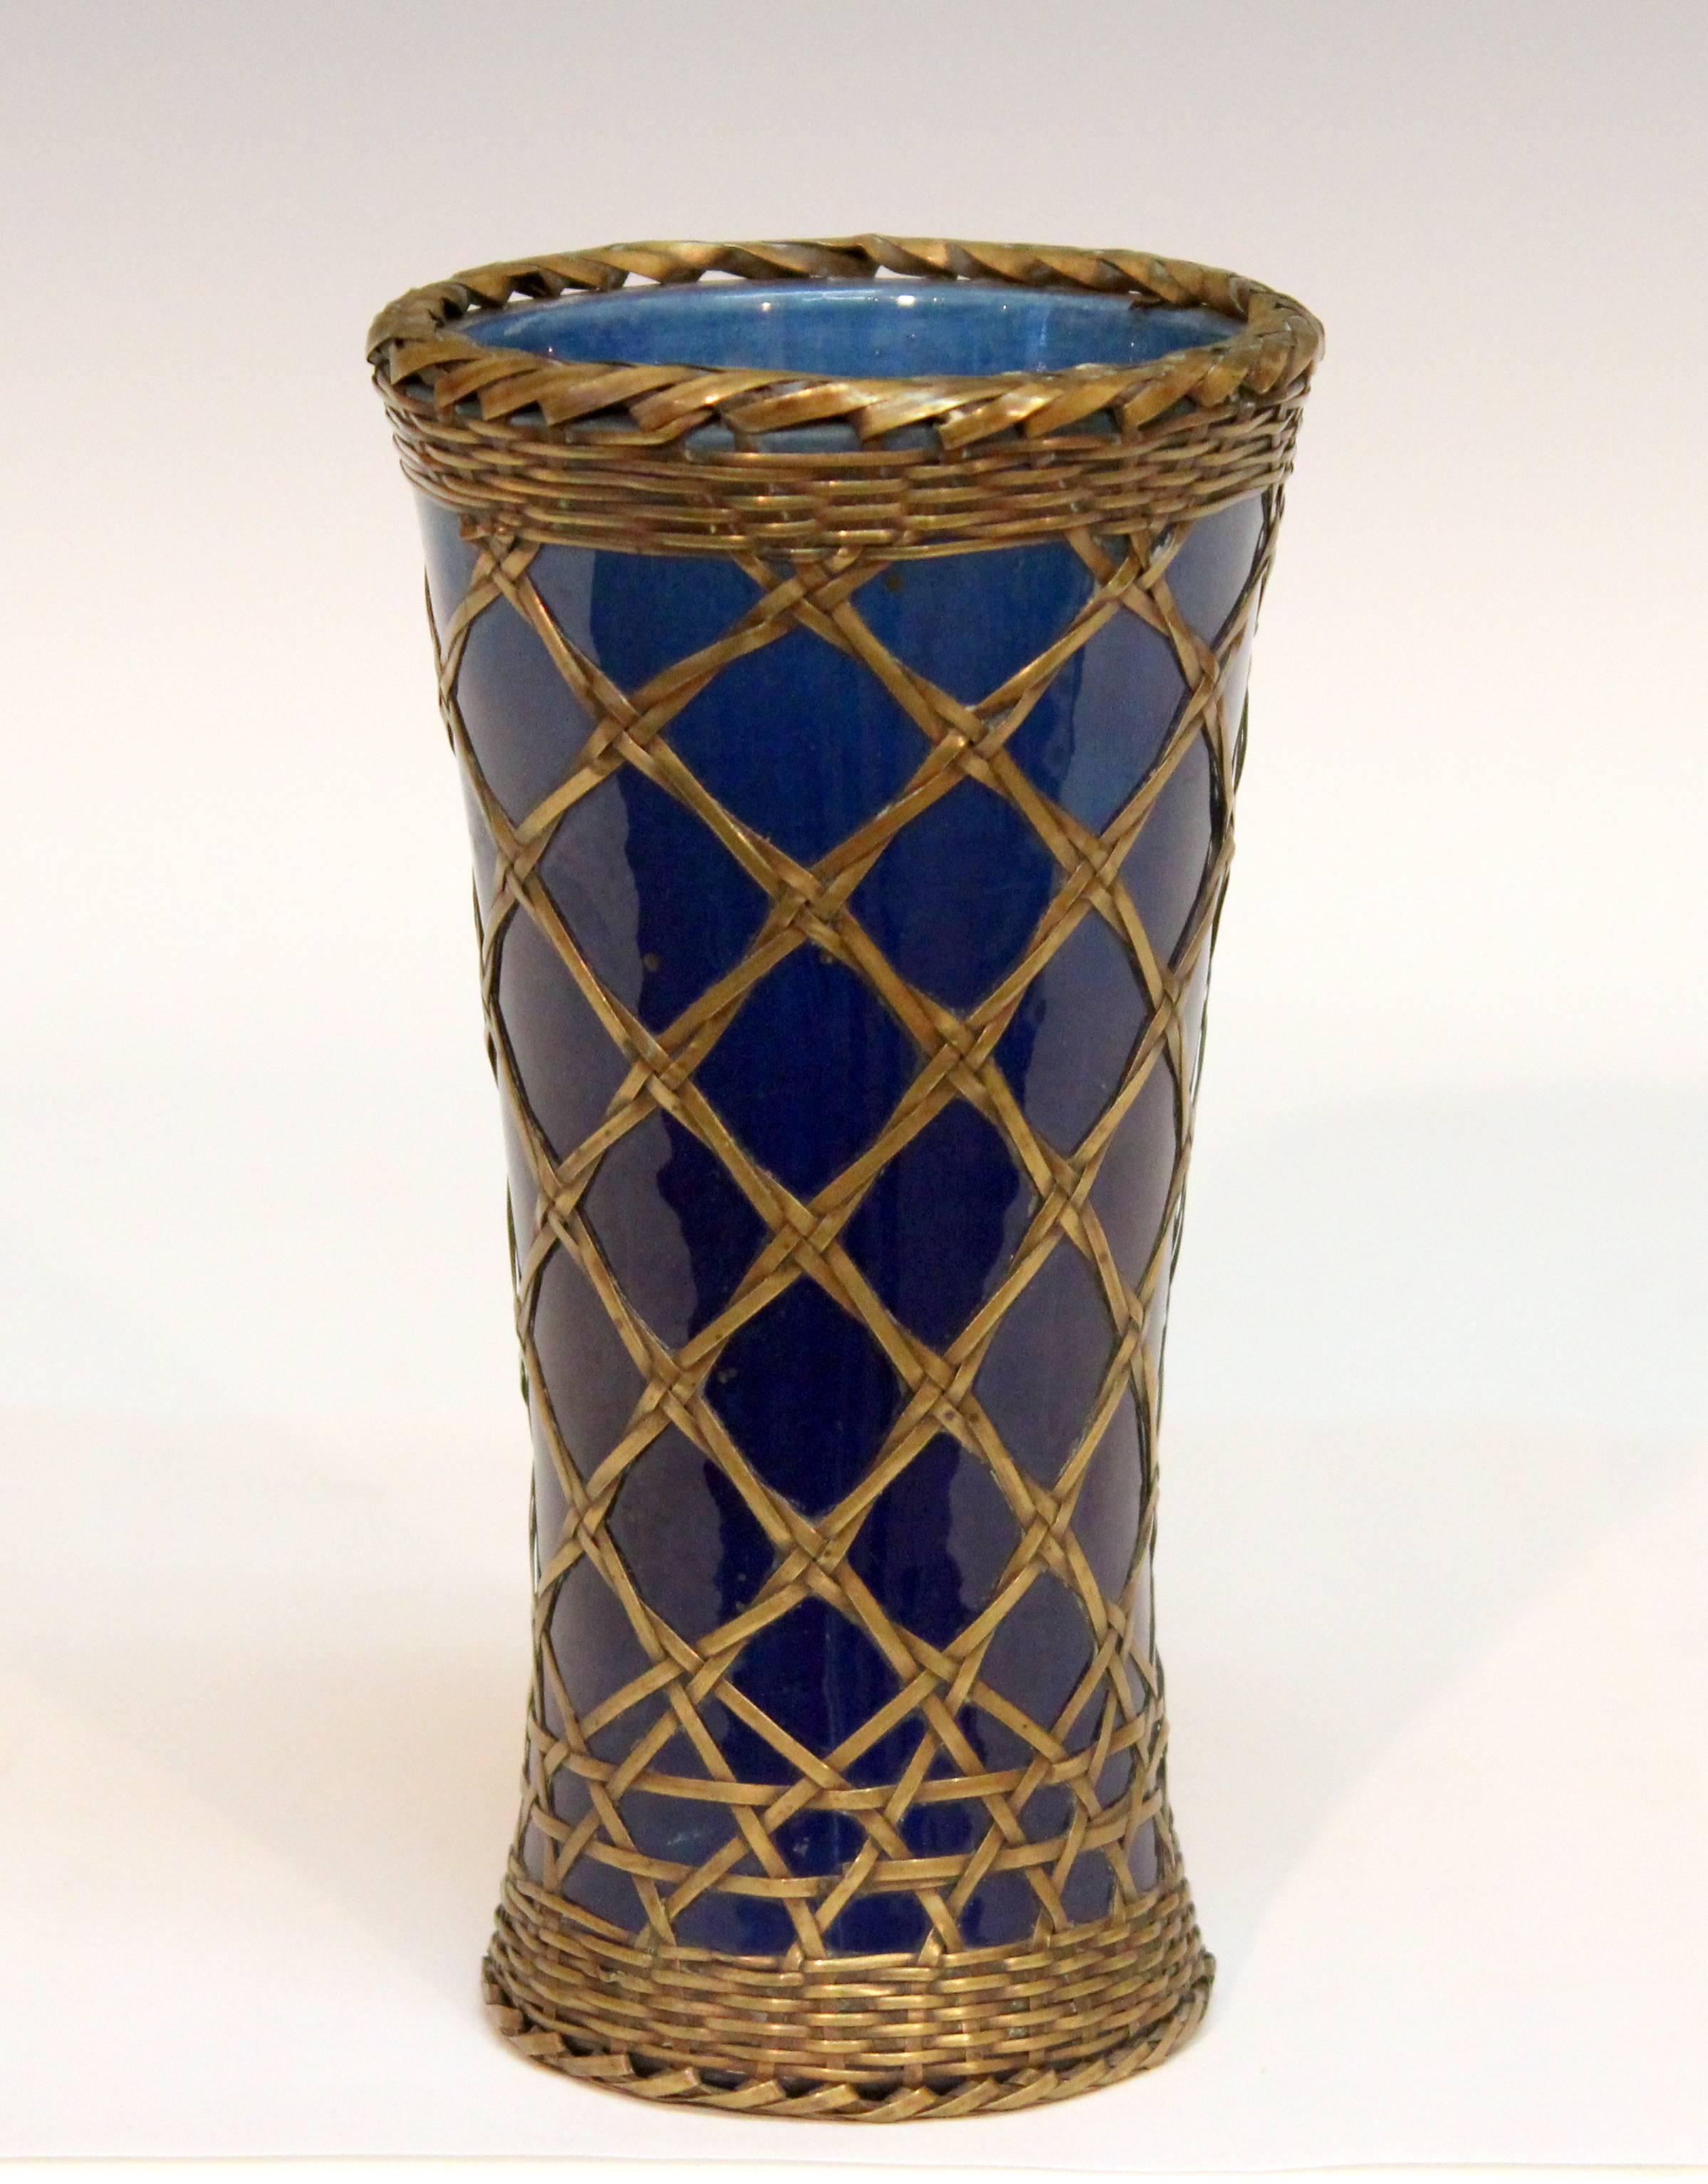 Antique Japanese Awaji vase in blue monochrome glaze with brass over-weaving, circa 1910. Impressed marks. Measures: 7